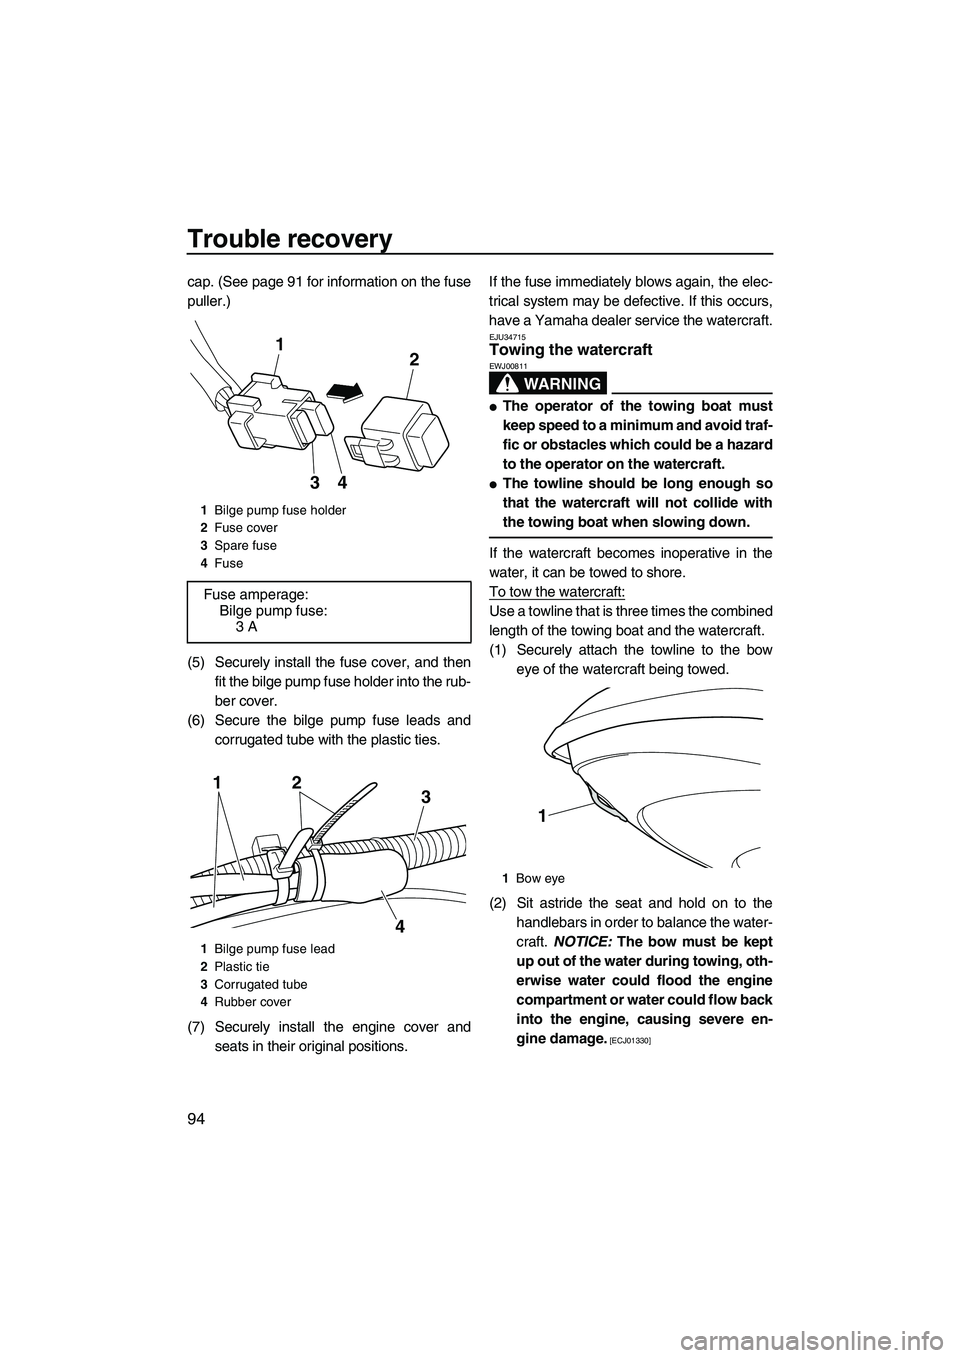 YAMAHA FZR 2013  Owners Manual Trouble recovery
94
cap. (See page 91 for information on the fuse
puller.)
(5) Securely install the fuse cover, and thenfit the bilge pump fuse holder into the rub-
ber cover.
(6) Secure the bilge pum